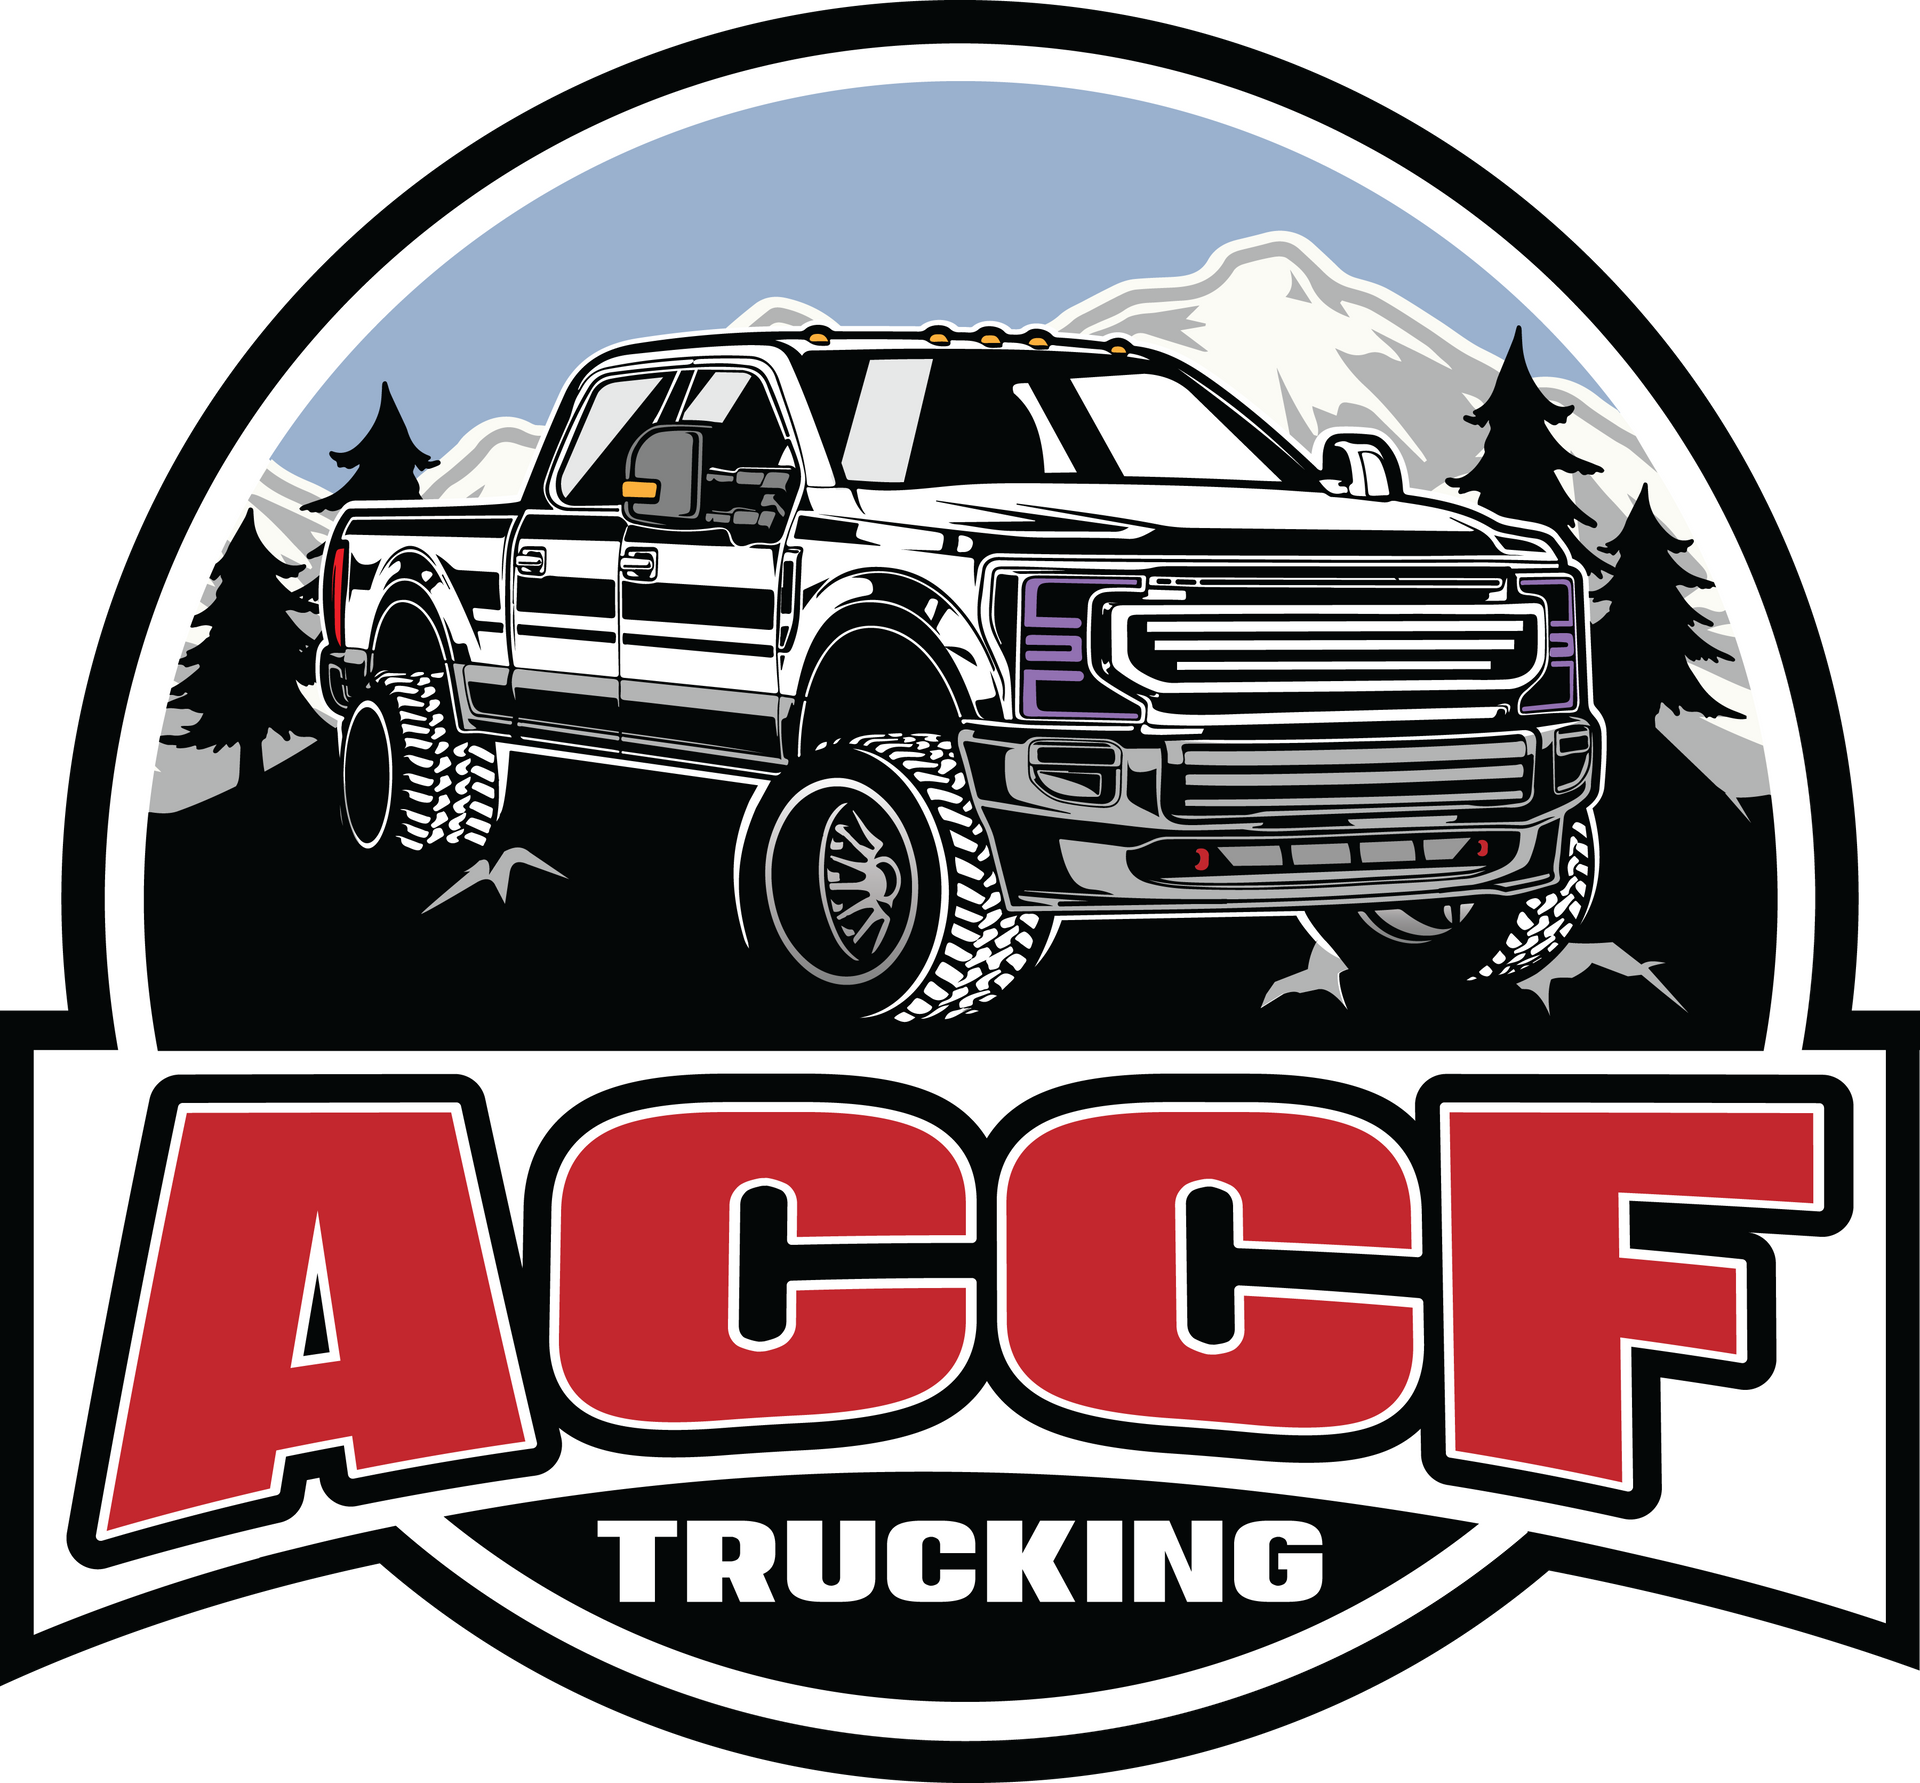 A logo for a trucking company with a truck and mountains in the background.